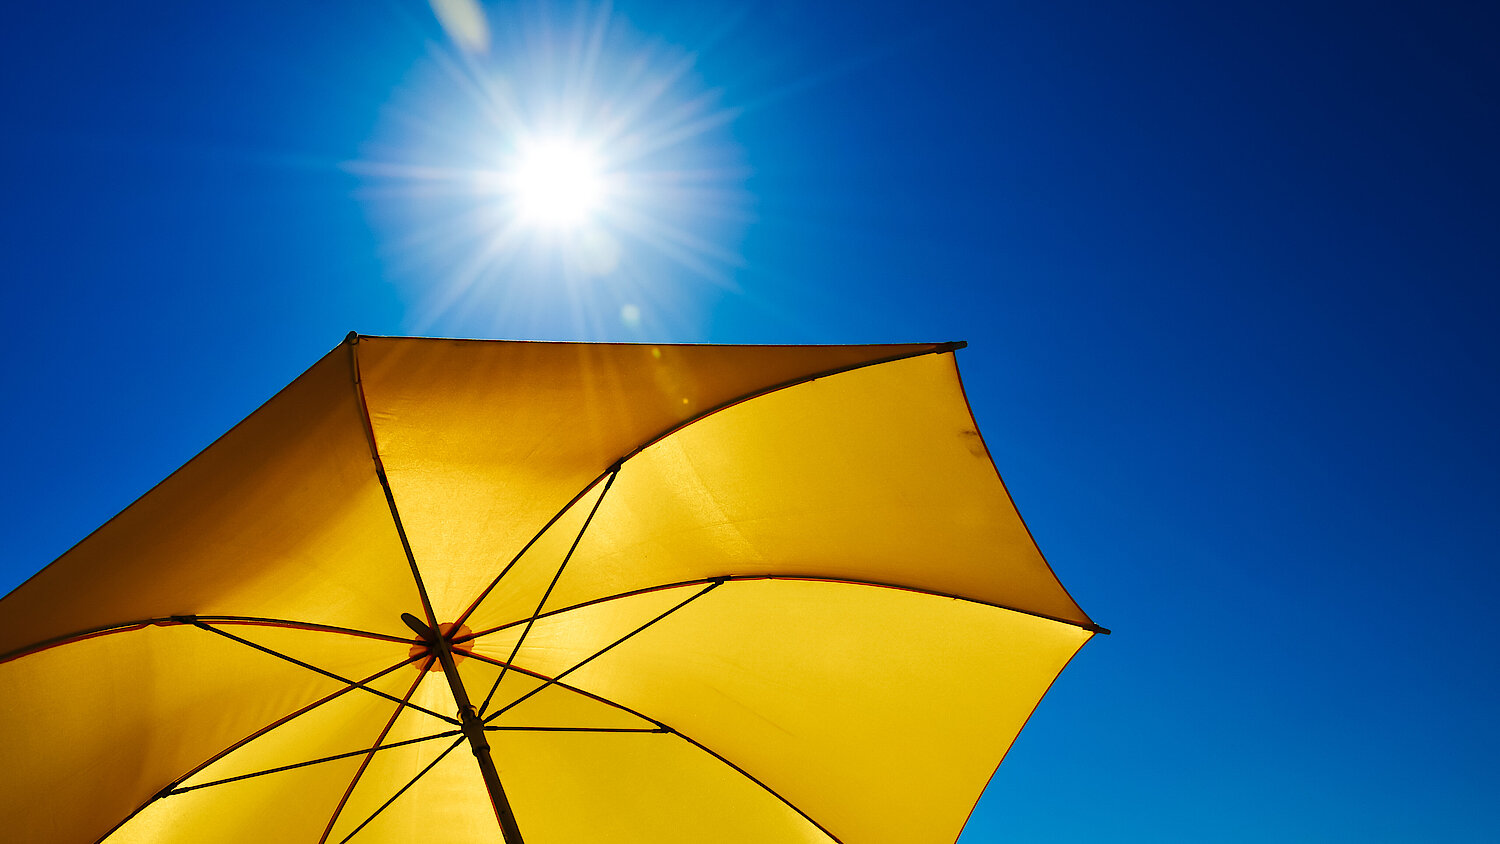 Photograph of a yellow umbrella and the sun